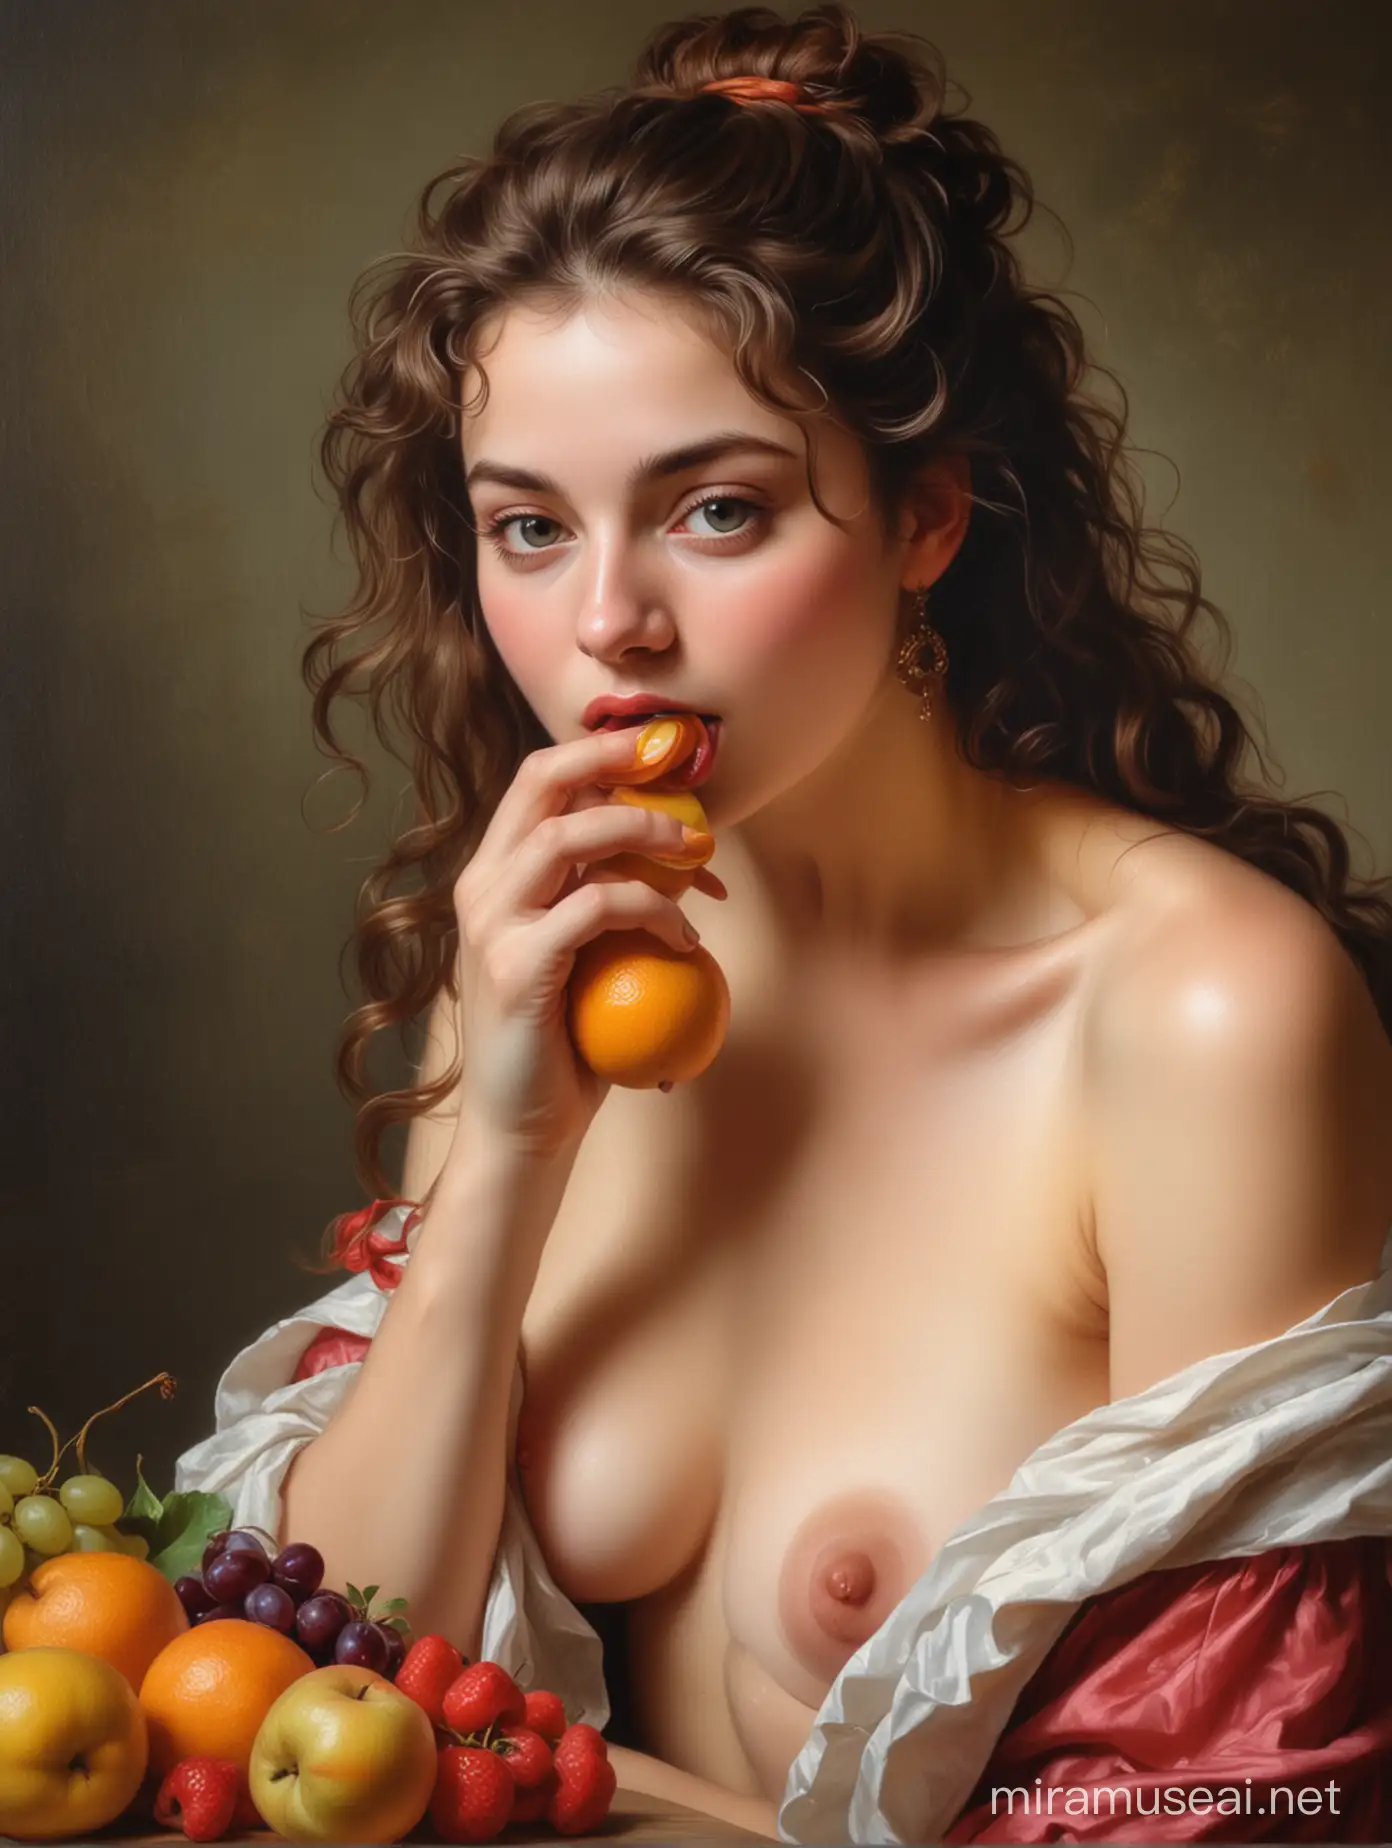 Nude oil painting of a young stunningly beautiful woman eating fruit. In the style of Elisabeth Vigee Le Brun.